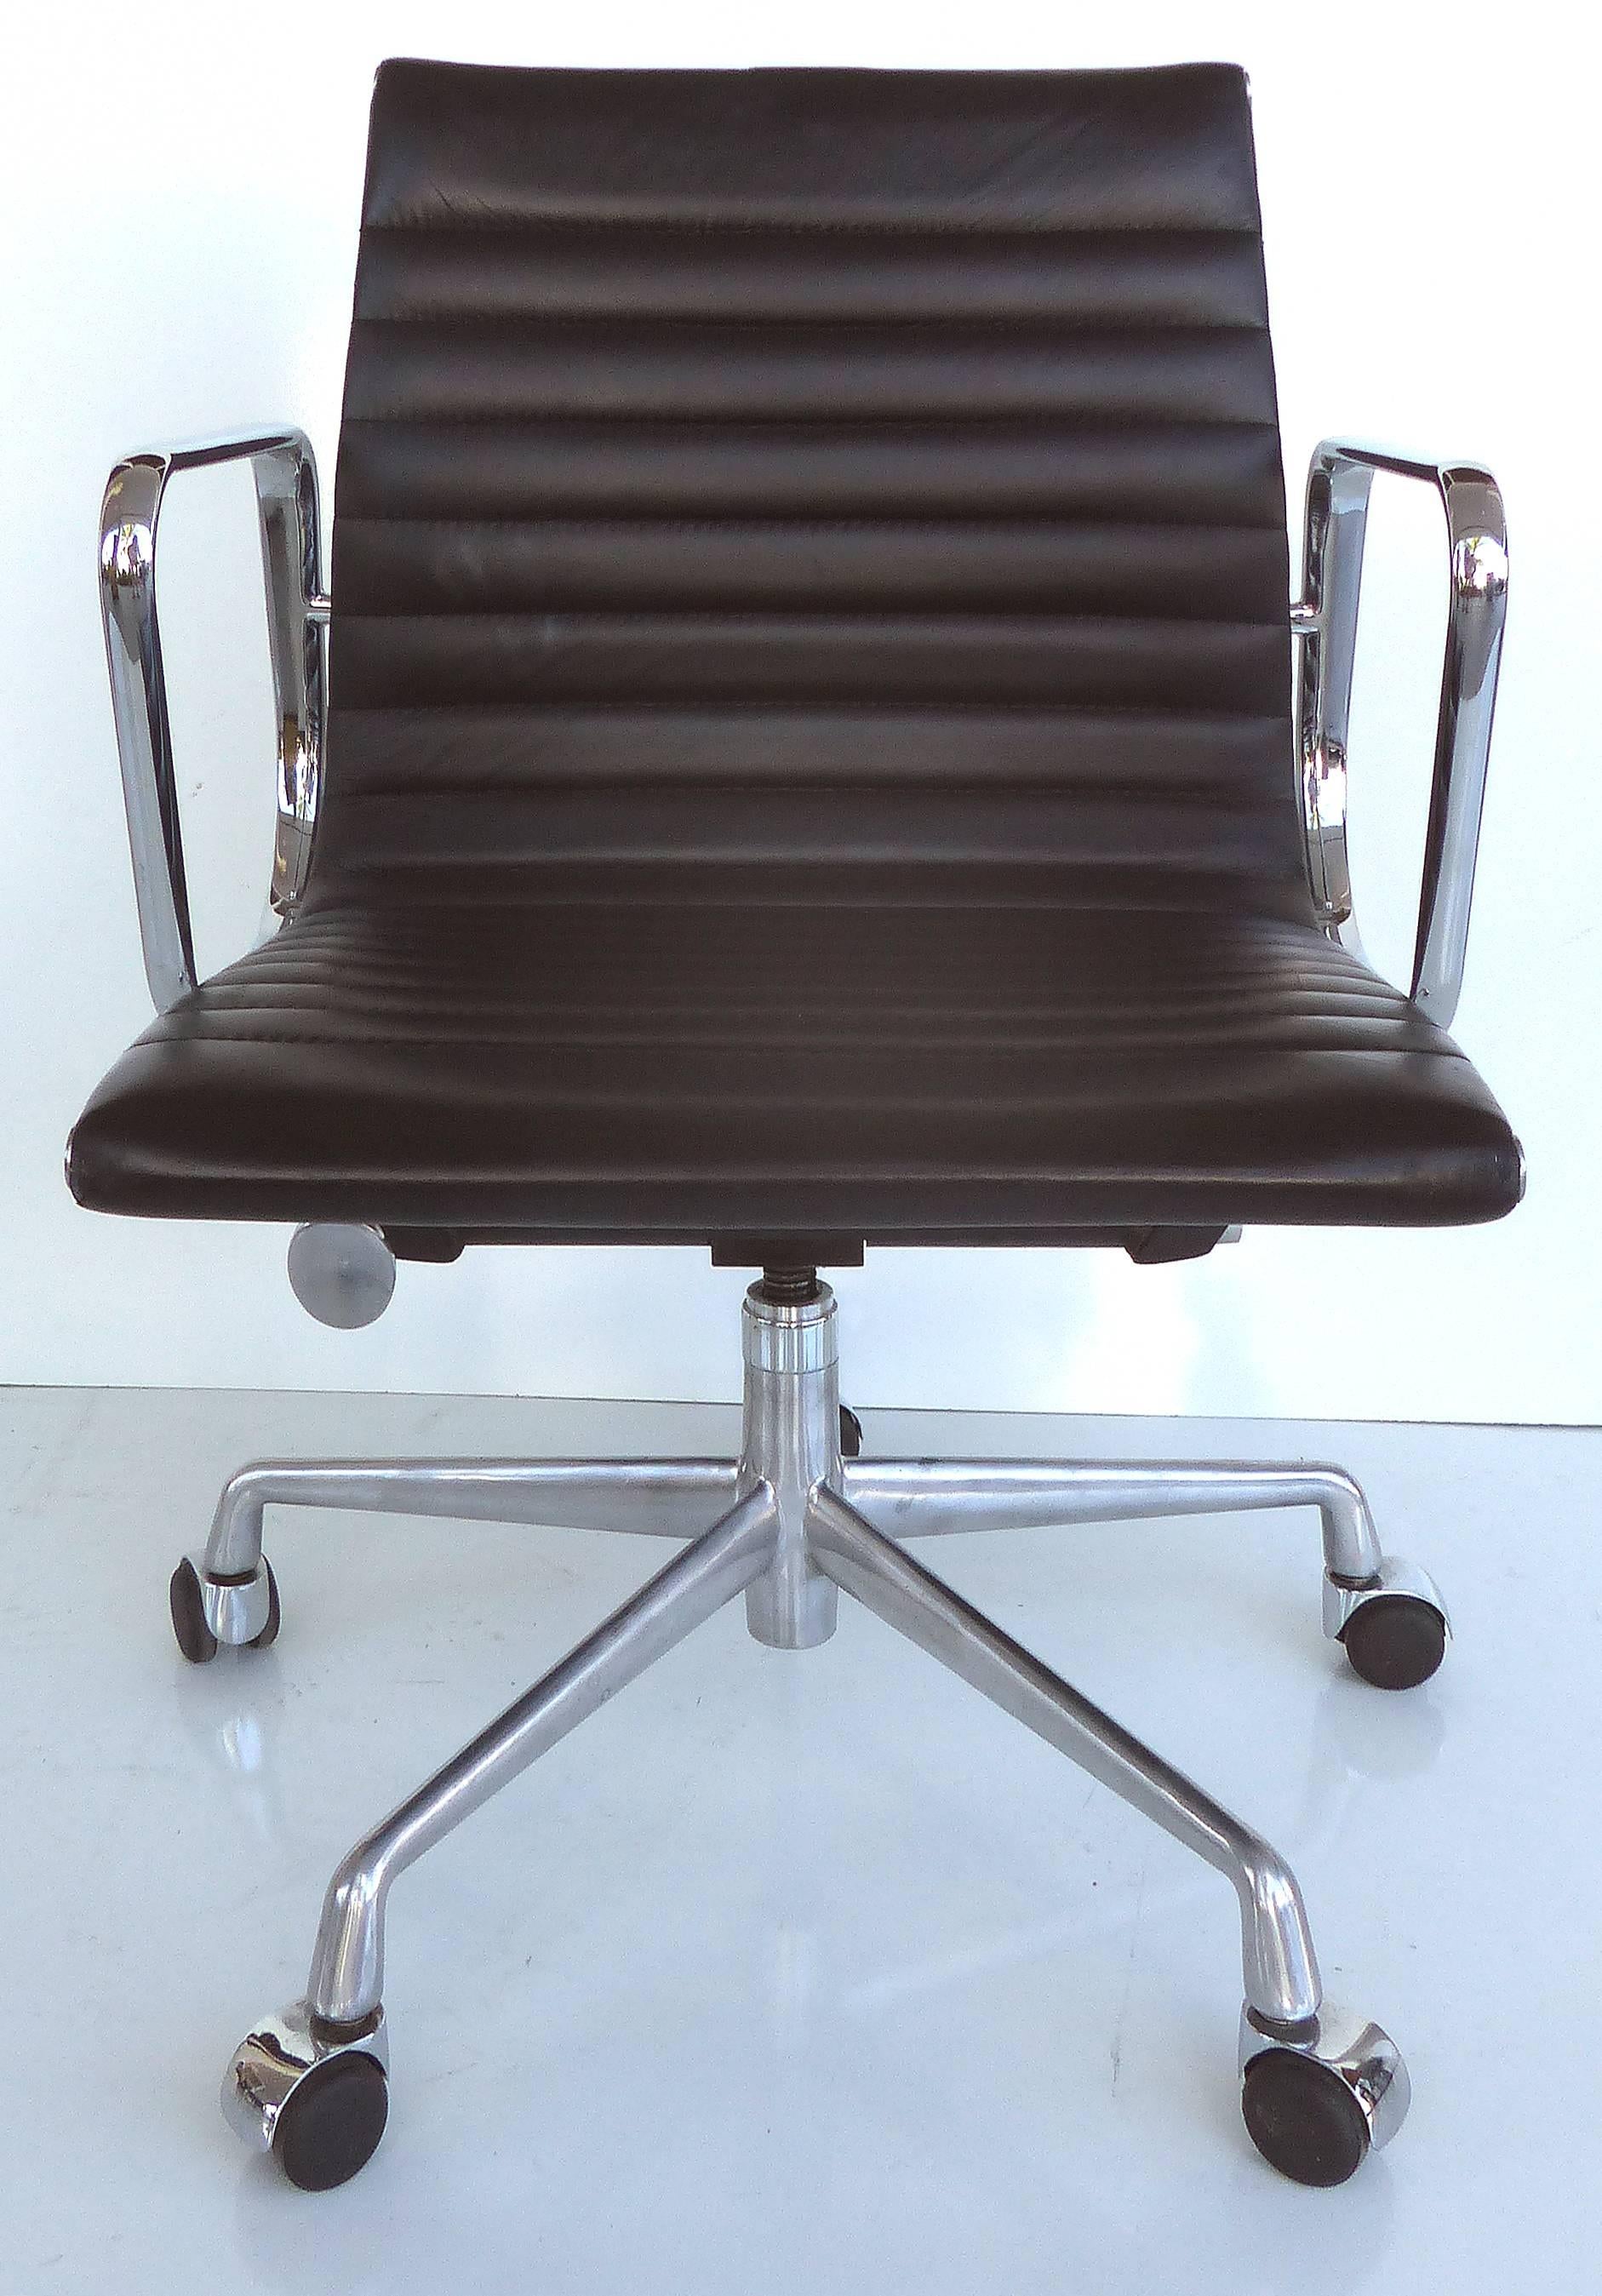 Mid-Century Modern Eames Leather Desk Chair

An Eames for Herman Miller aluminium group desk chair with a channeled leather upholstery. Measures: Arm 24.6